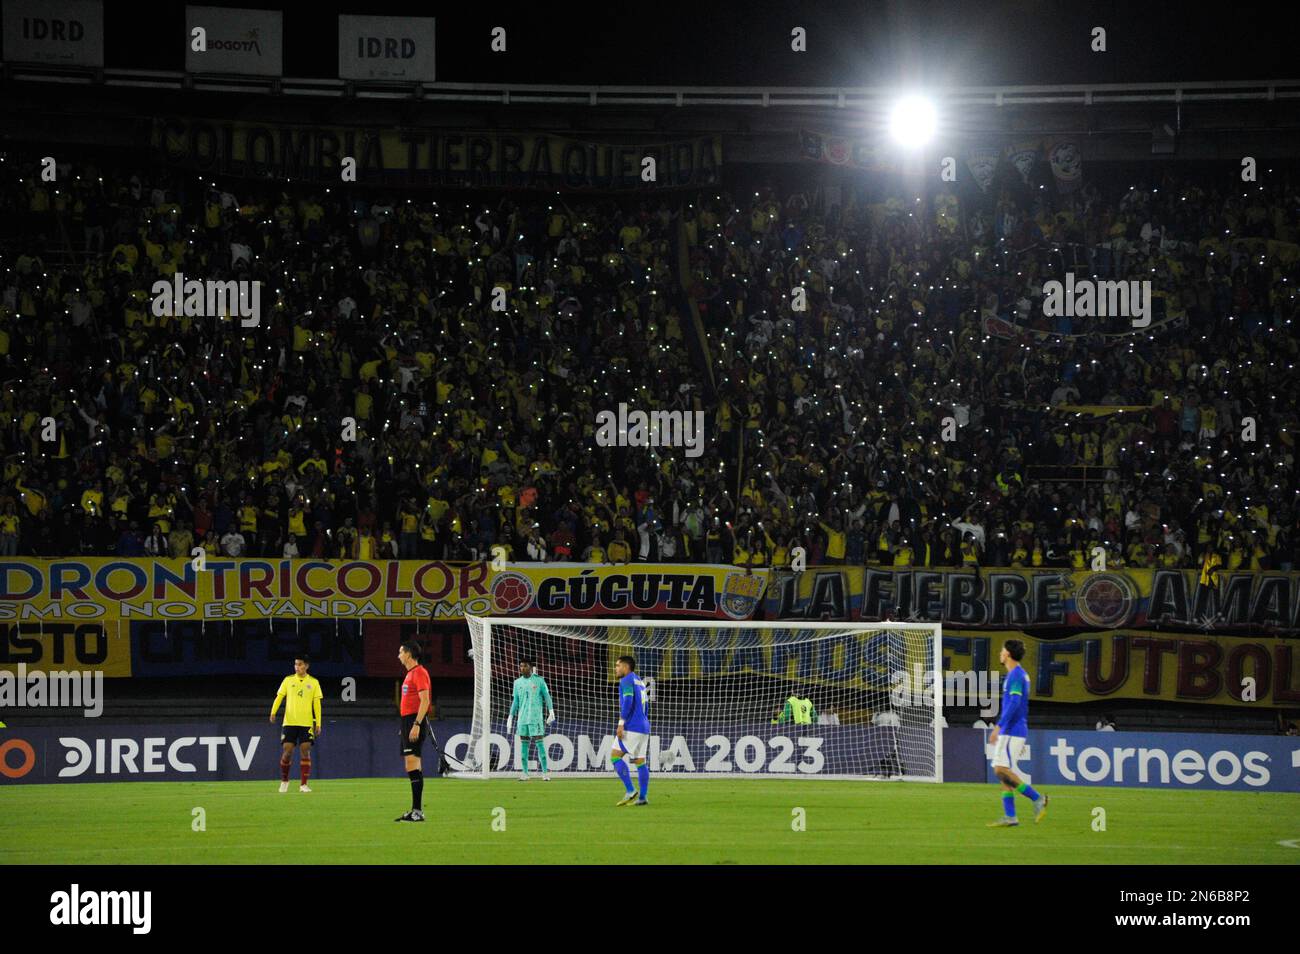 Bogota, Colombia on February 8, 2023. Colombia fans during the CONMEBOL South American U-20 Colombia tournament match between Colombia and Brazil, in Bogota, Colombia on February 8, 2023. Photo by: Chepa Beltran/Long Visual Press Stock Photo